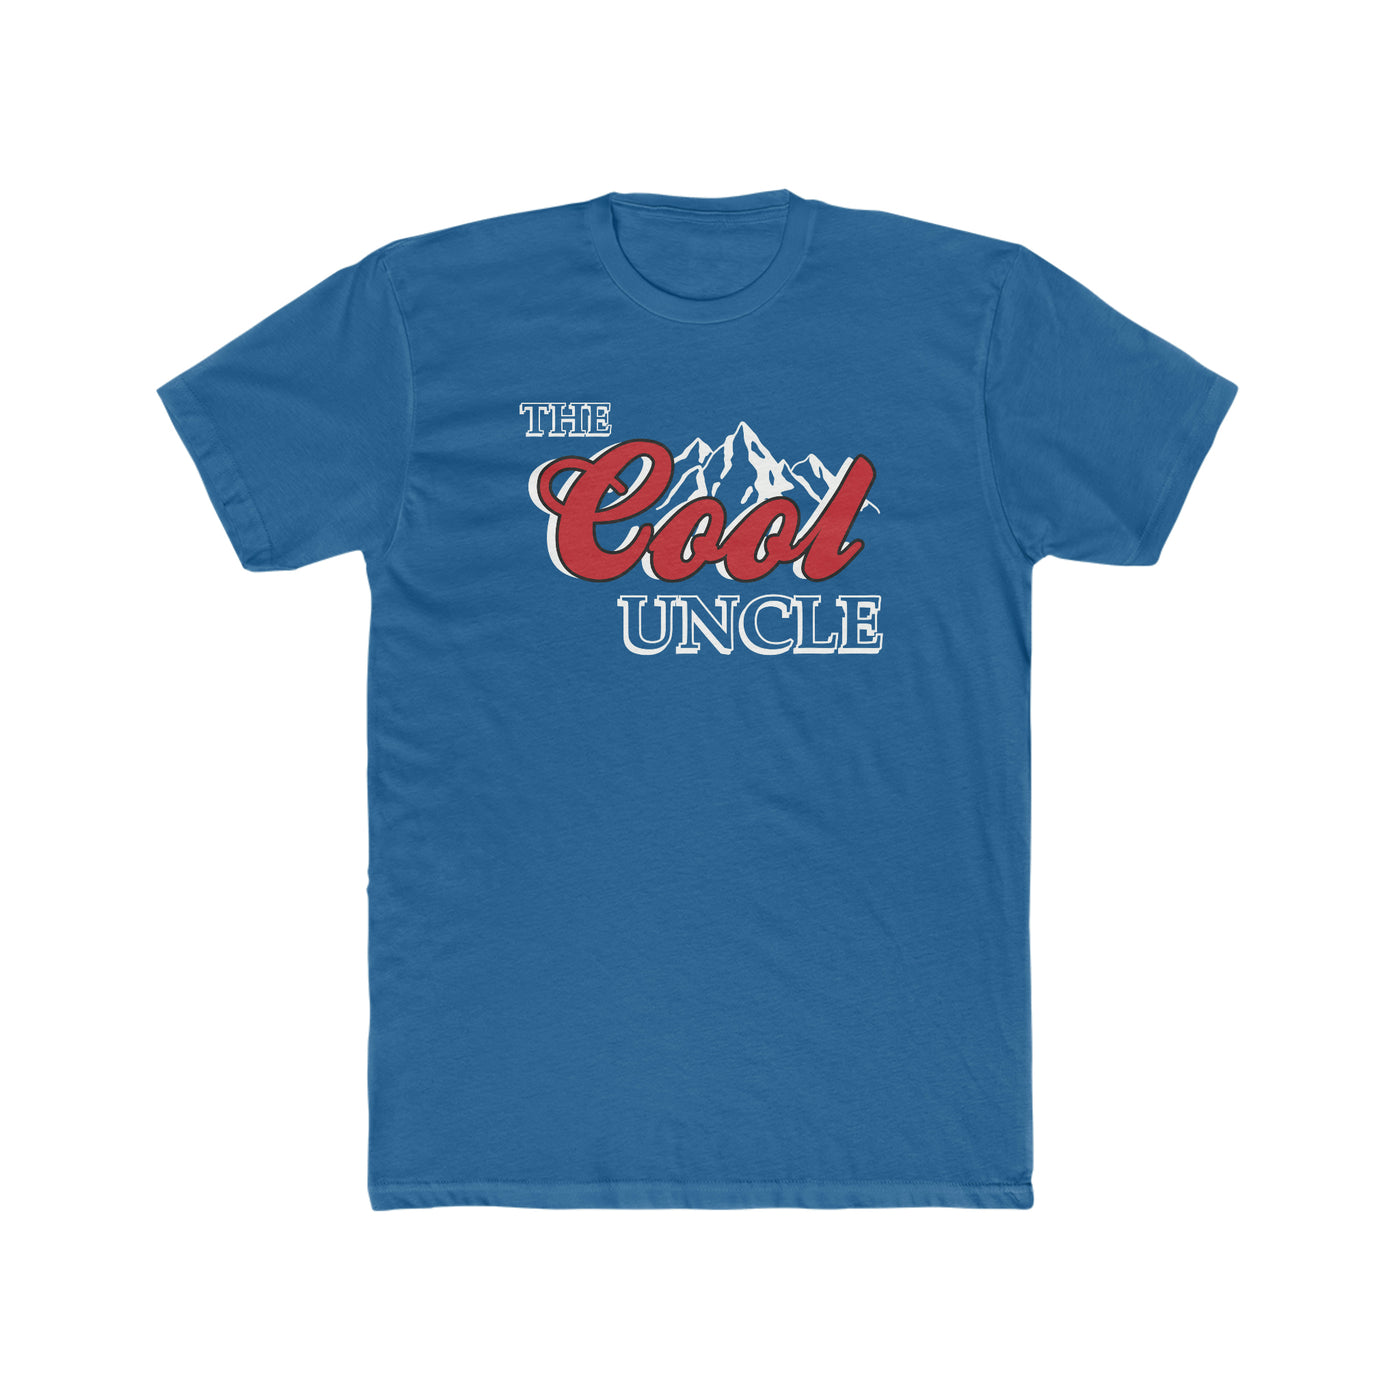 The Cool Uncle Tee